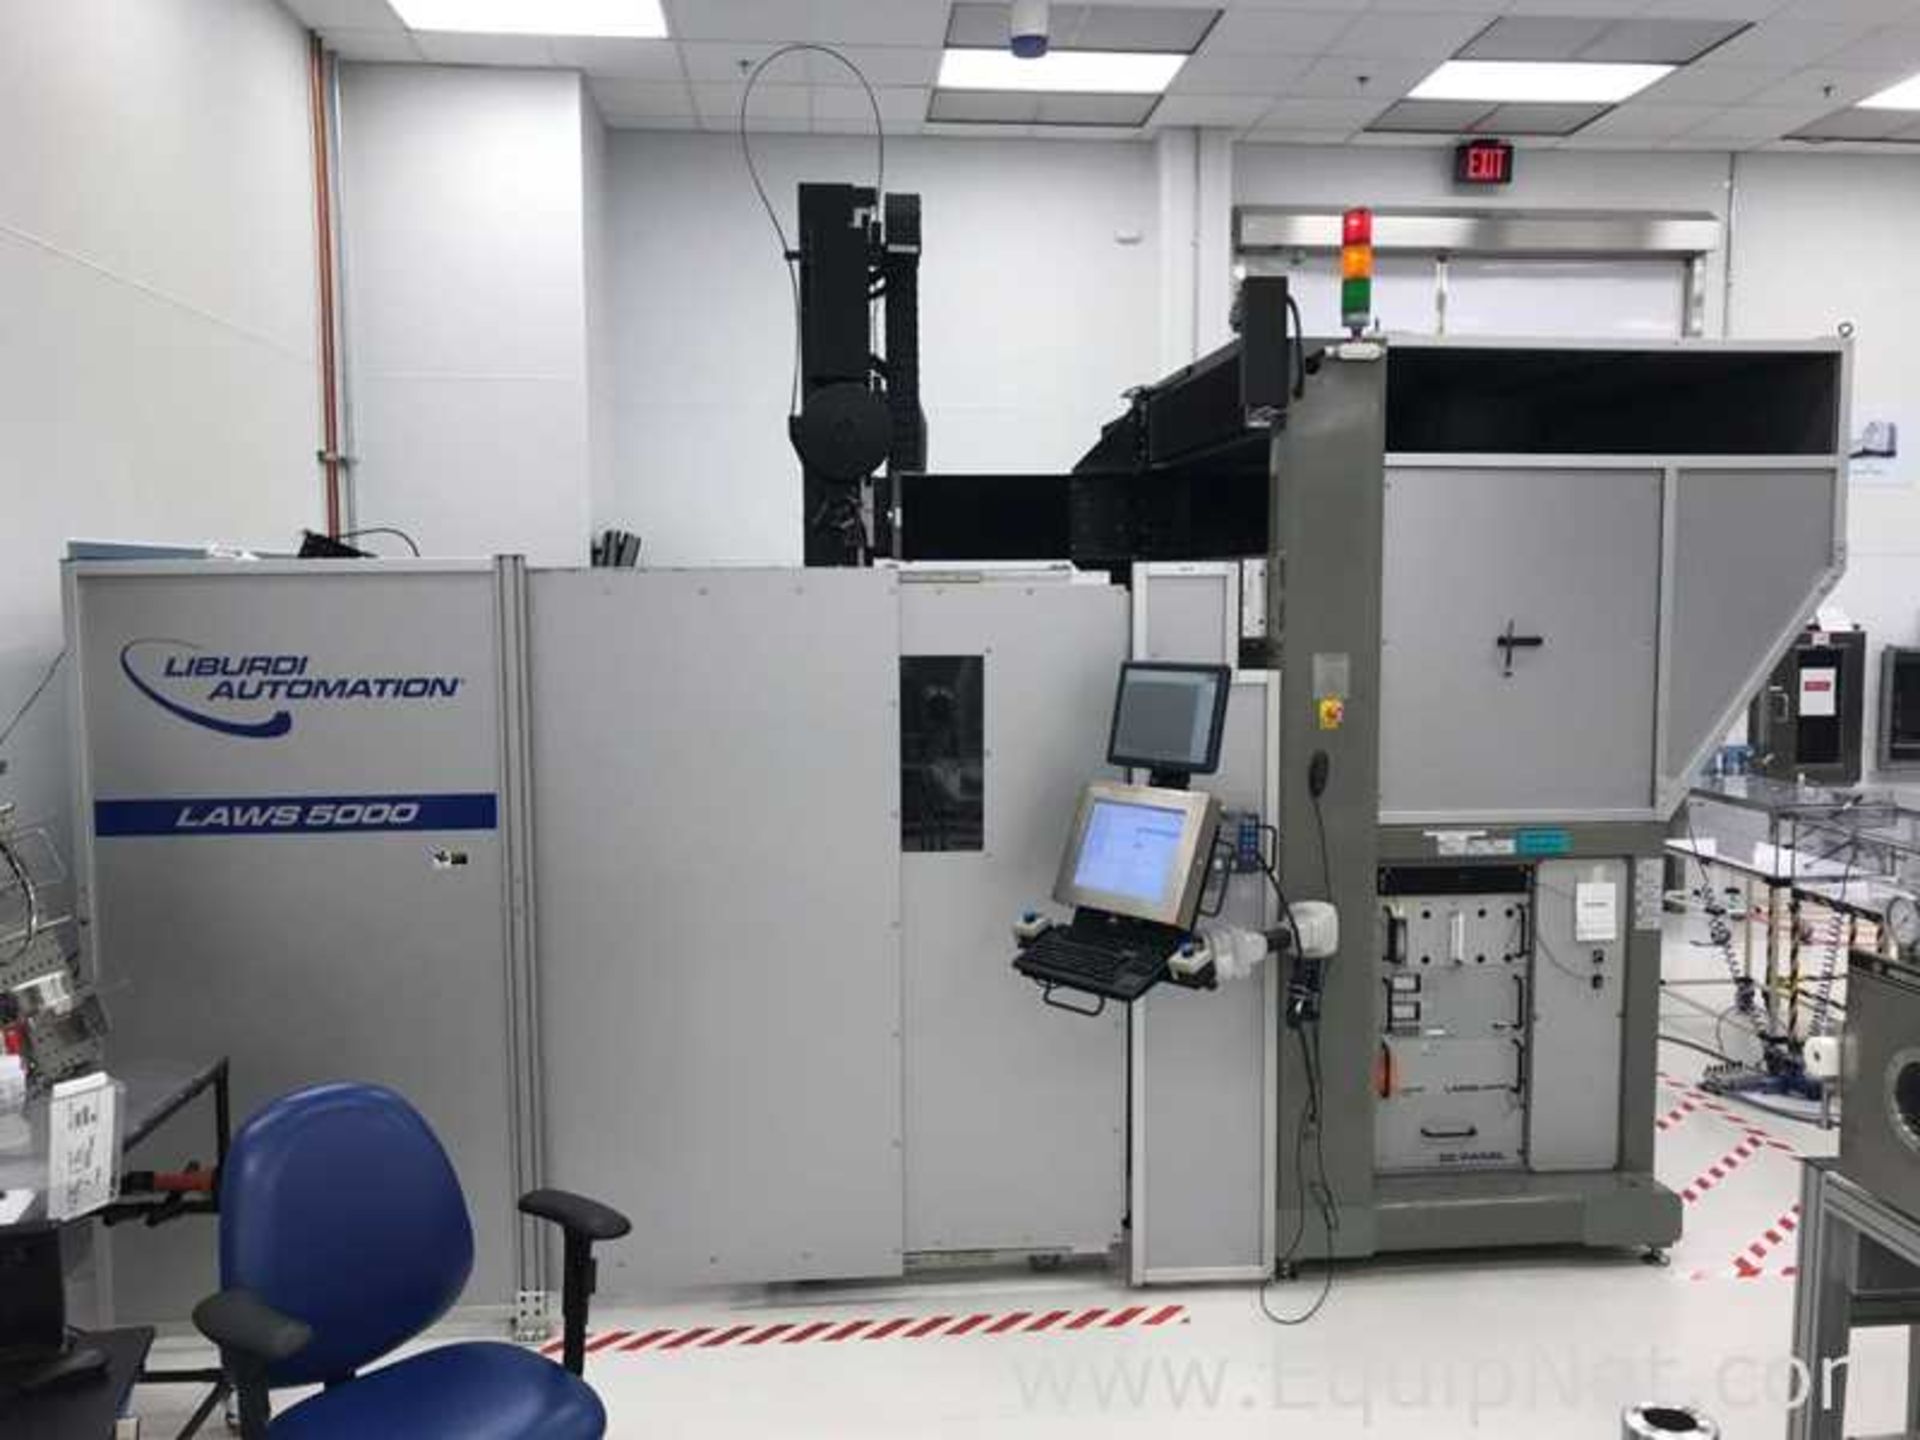 Liburdi Automation Laws 5000 Multi Axis Tig Welding Cell with 4 Yaskawa Robotic Positioners - Image 13 of 13